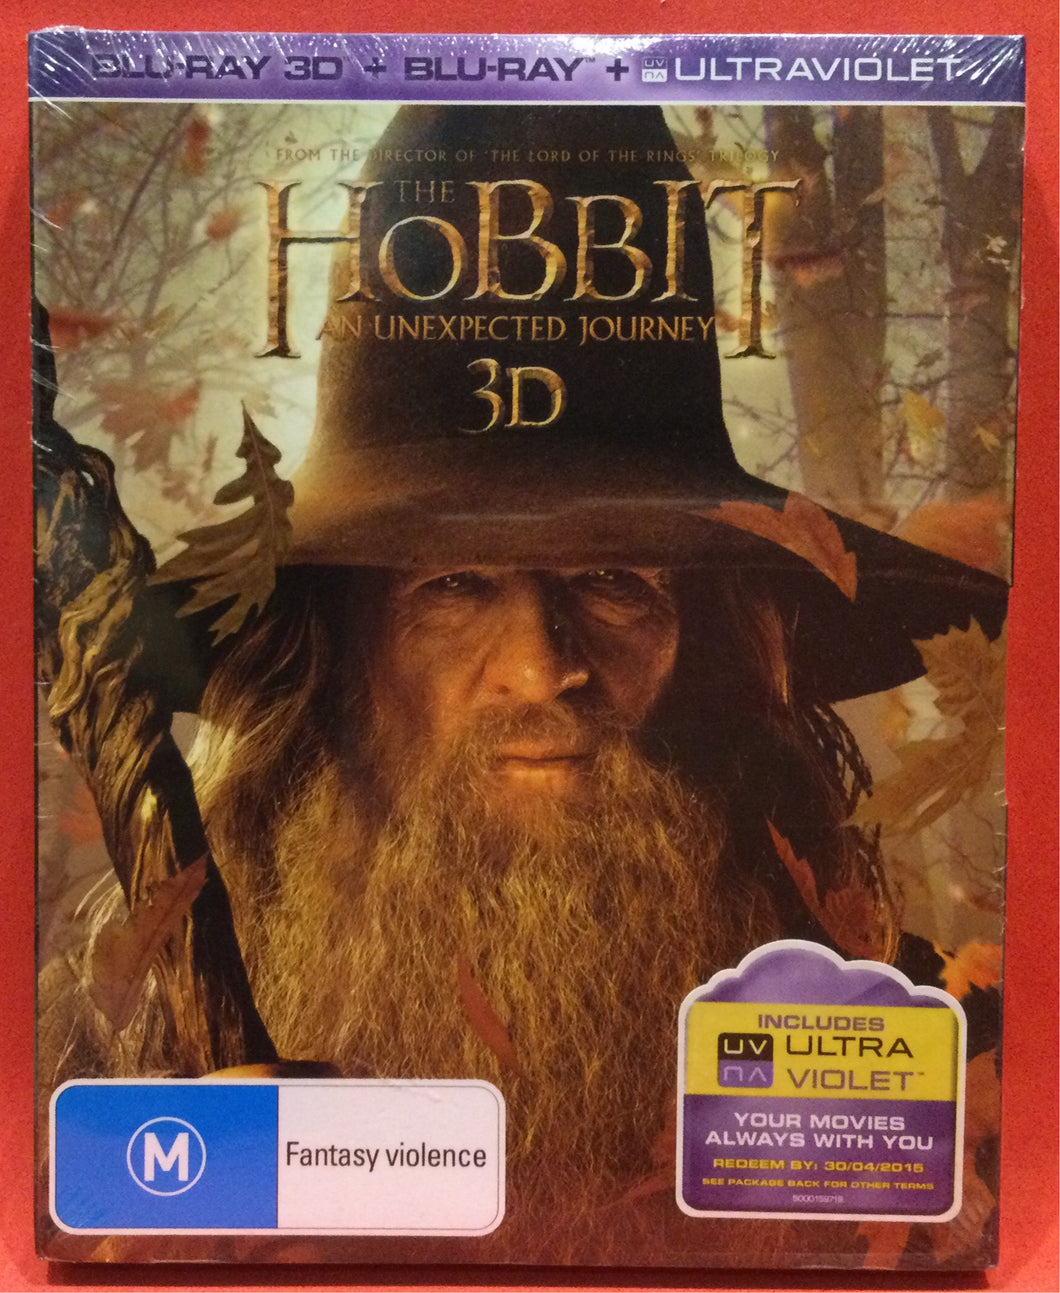 HOBBIT, THE - AN UNEXPECTED JOURNEY 3D - BLU-RAY (SEALED)